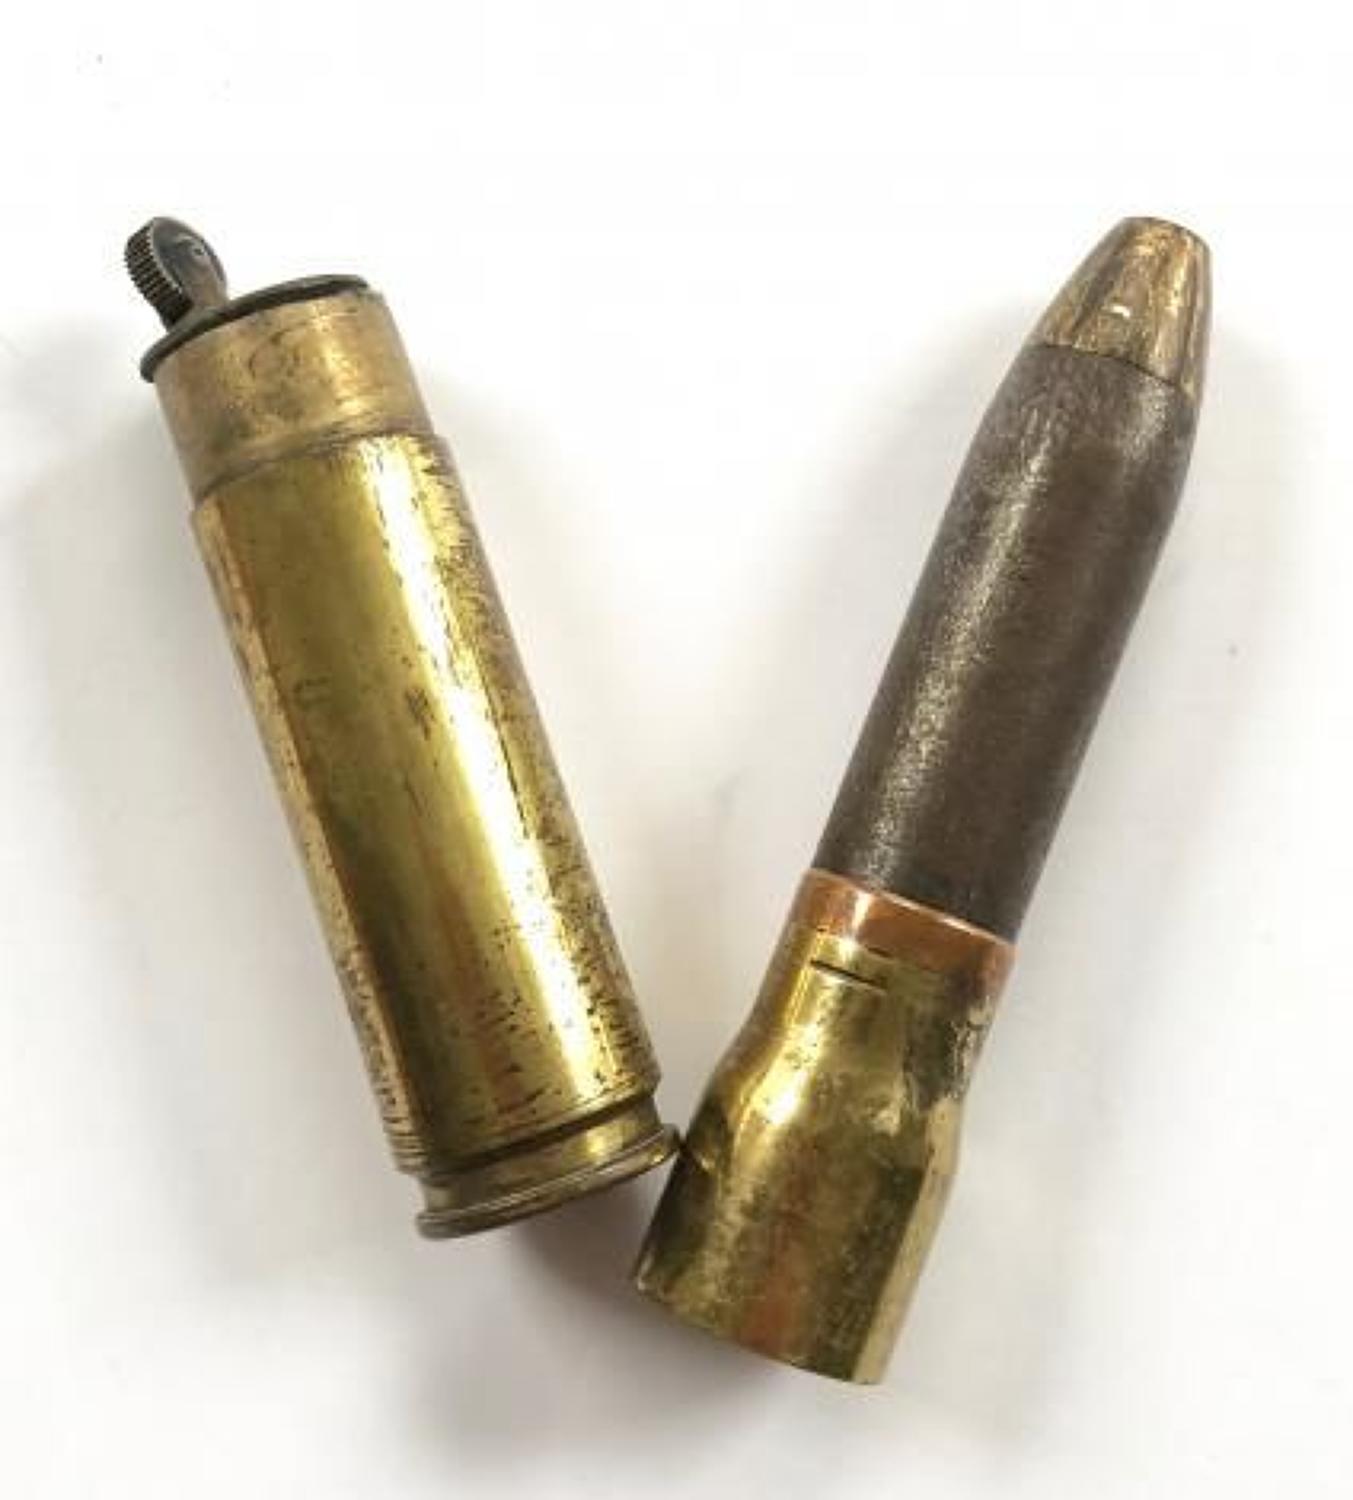 WW2 RAF Trench Art 20mm Cannon Shell Cigarette Lighter.